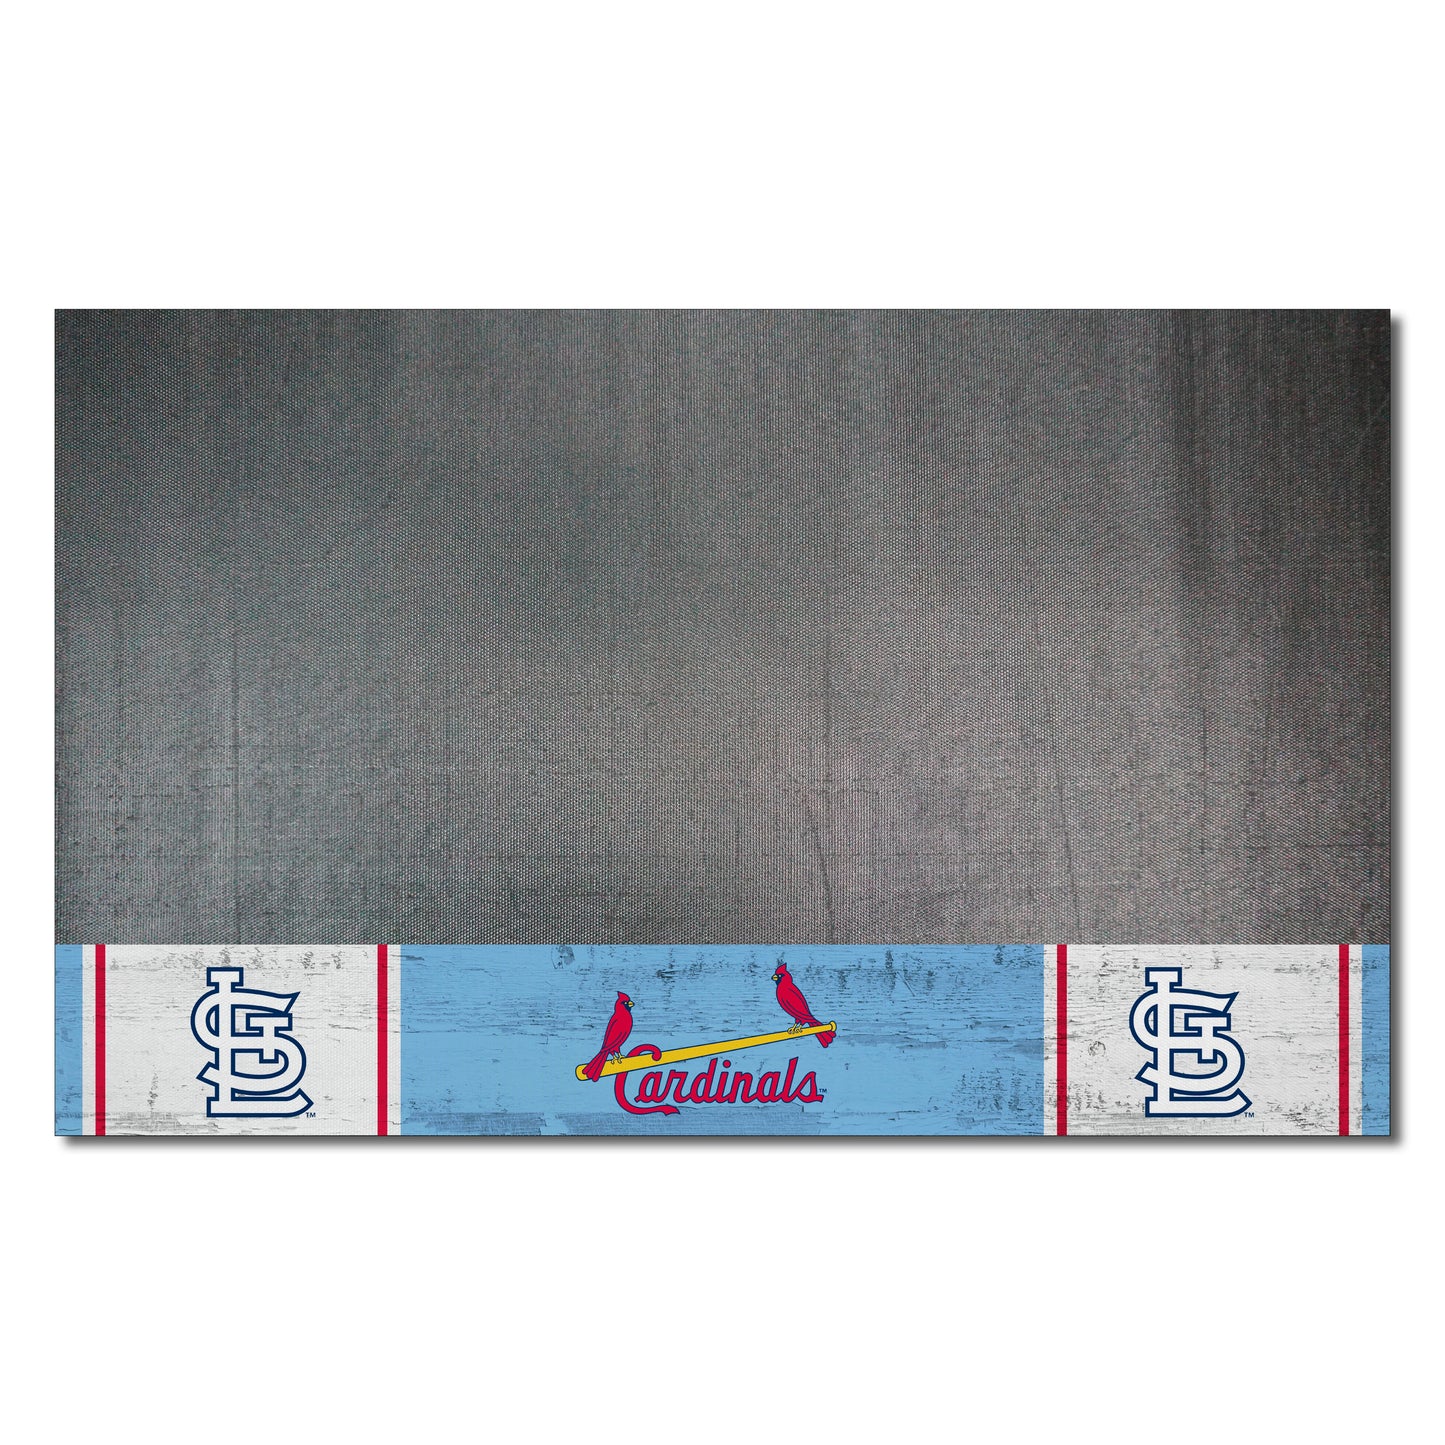 St. Louis Cardinals Vinyl Grill Mat - 26in. x 42in. - Retro Collection, 1976 St. Louis Cardinals